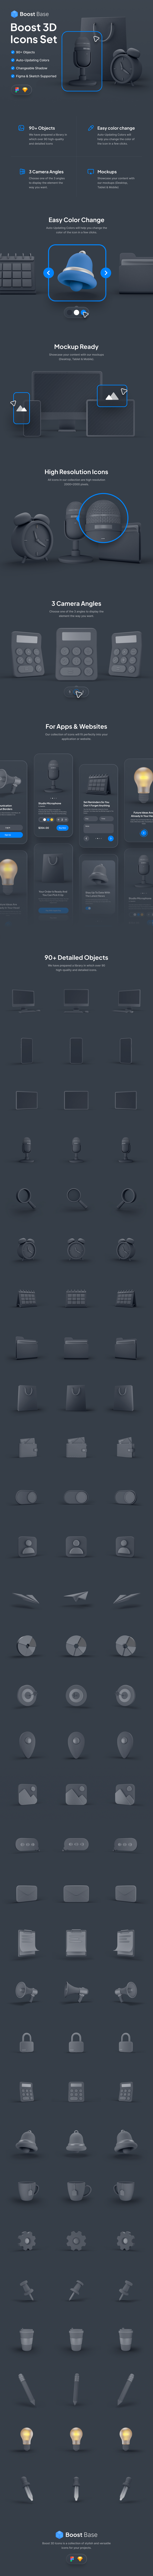 3D 3D Icon Set 3d icons 3D pack BOOST 3D ICONS BOOST BASE Figma icons icons set sketch